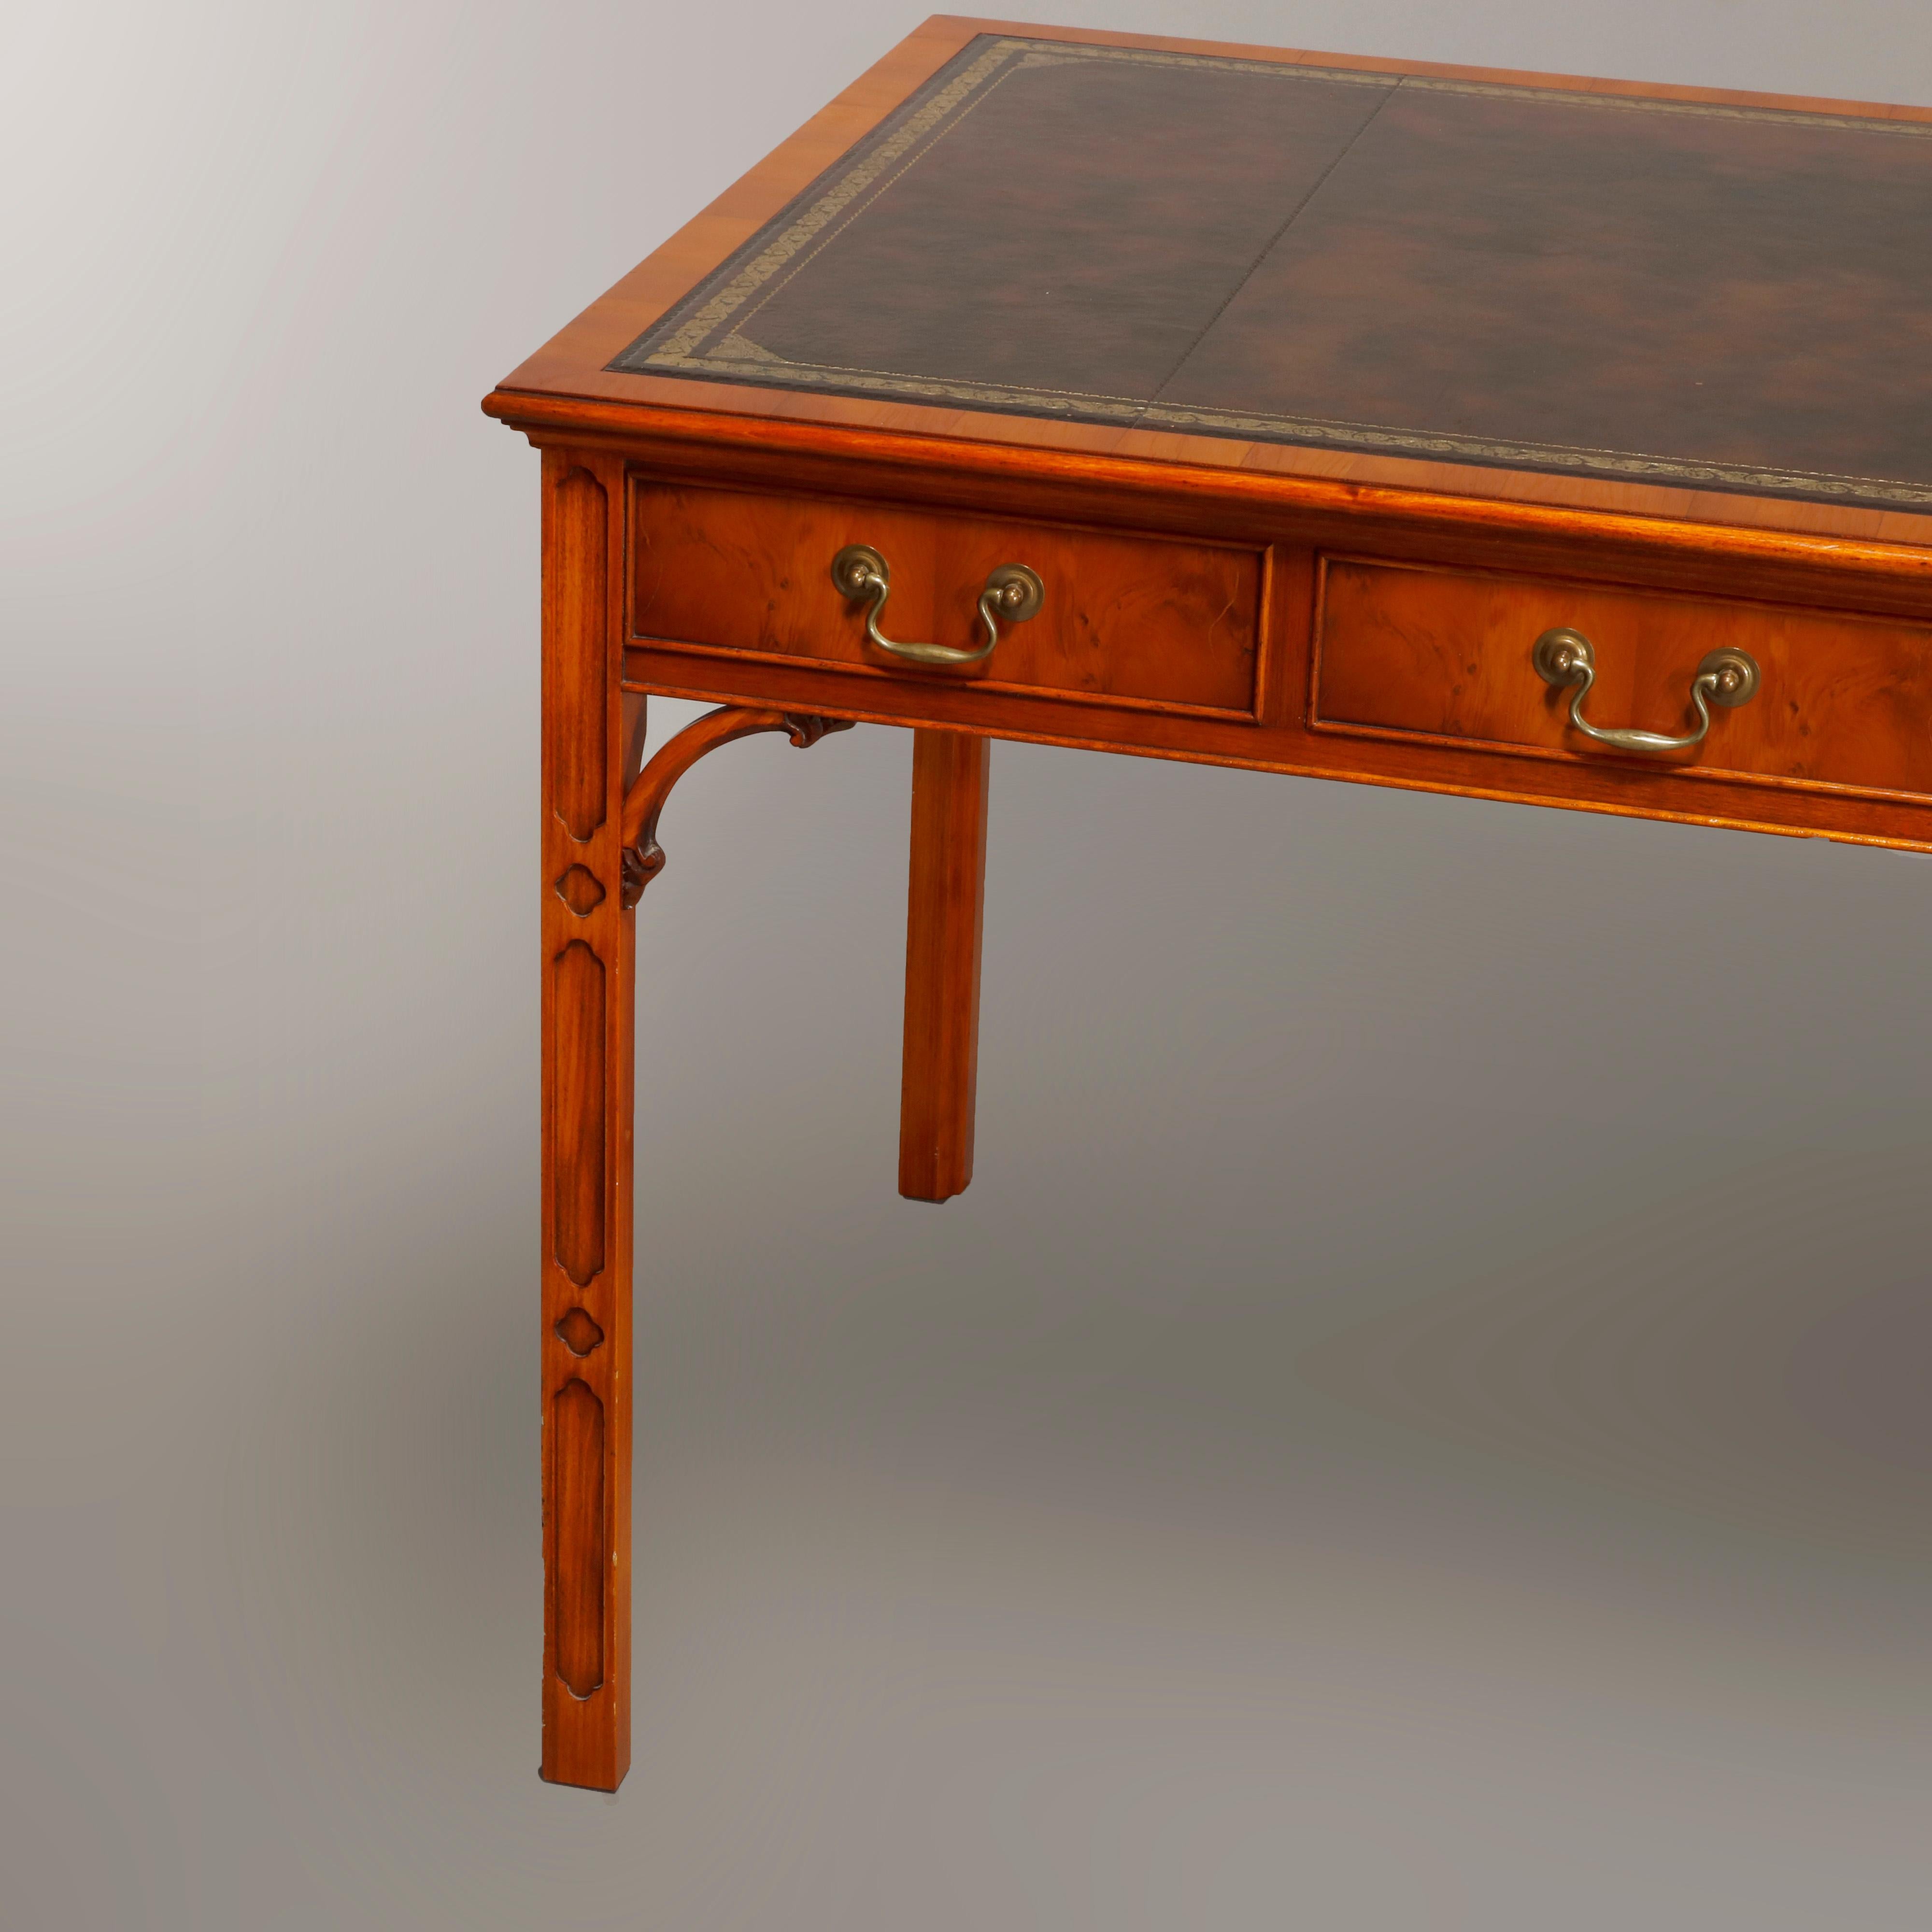 An antique English Chinese Chippendale flat top writing desk by Bevan Funnell Reprodux offers mahogany and olivewood construction with gilt decorated leather top surmounting carved mahogany base with three drawers and side panels having olivewood